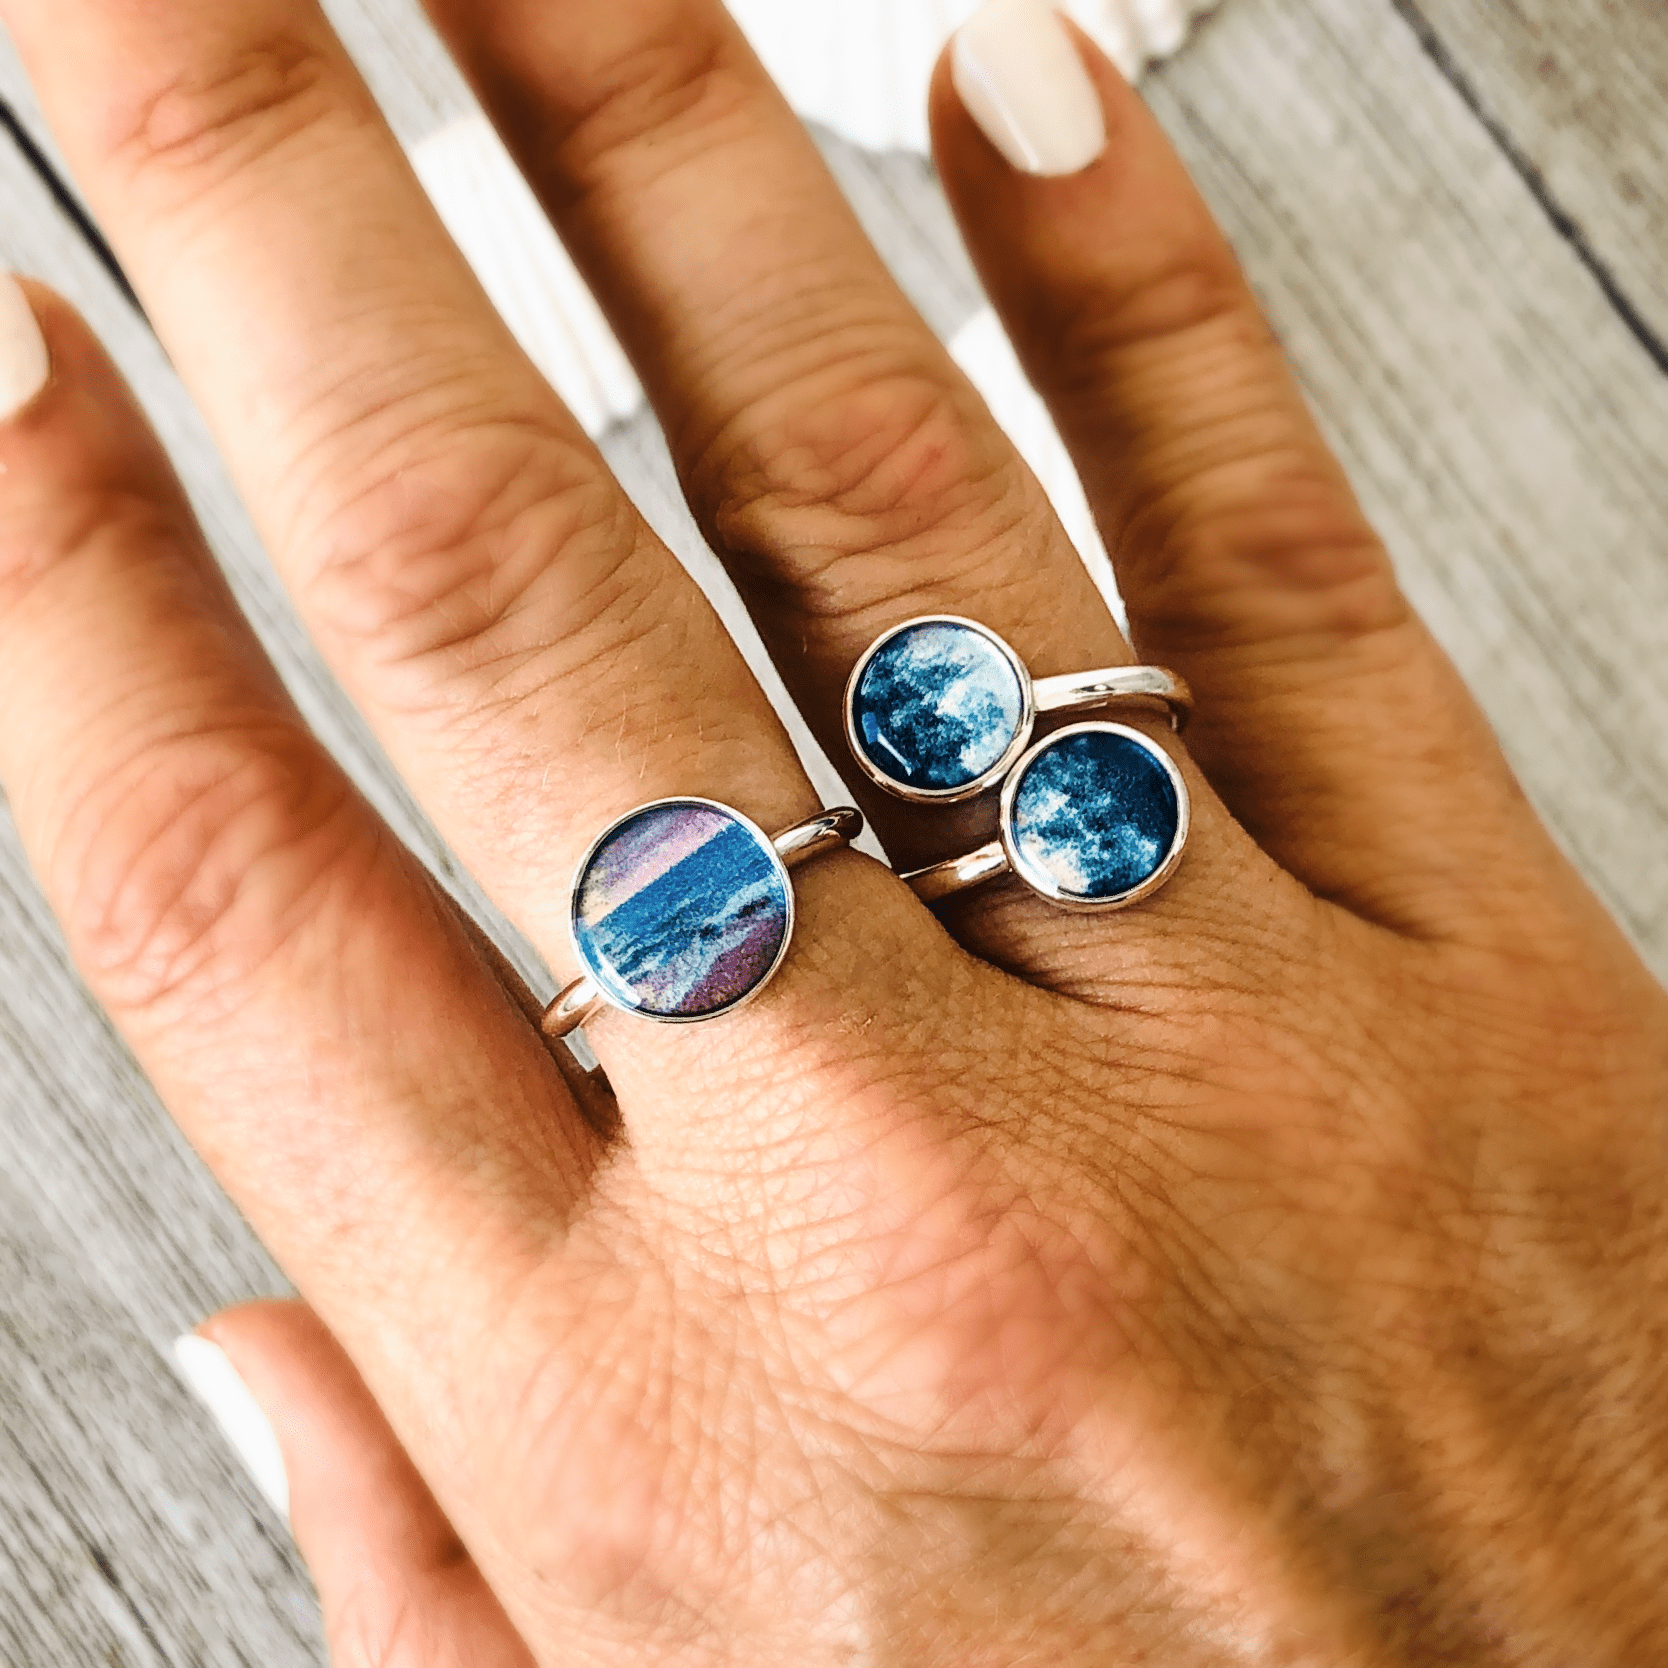 Cape Cod Sunrise Ring by Allie Richards